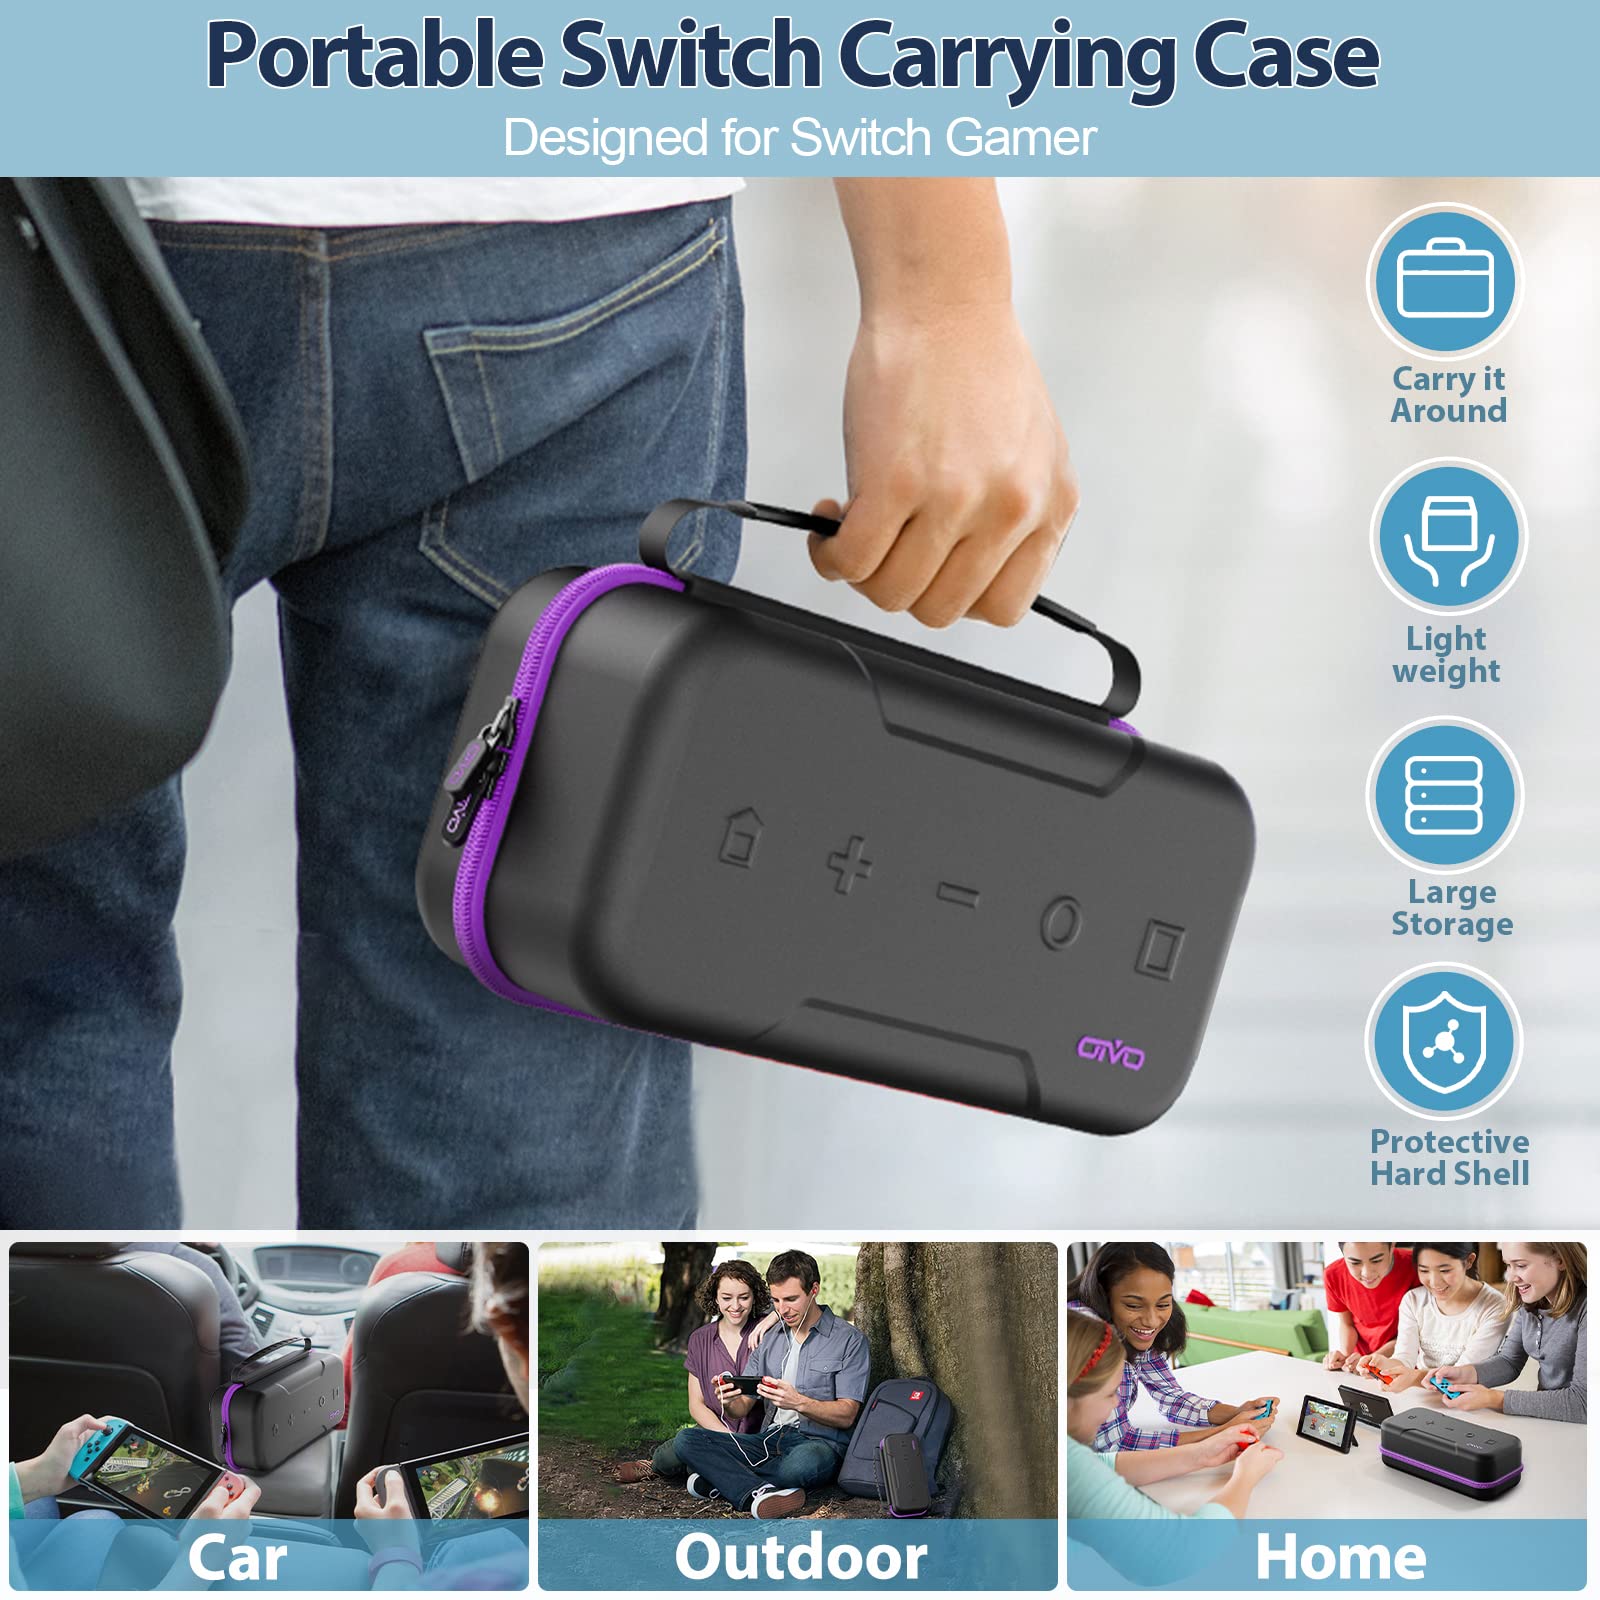 Switch OLED Carrying Case Compatible with Nintendo Switch/OLED Model, Portable Switch Travel Carry Case Fit for Joy-Con and Adapter, Hard Shell Protective Switch Pouch Case with 20 Games, Purple